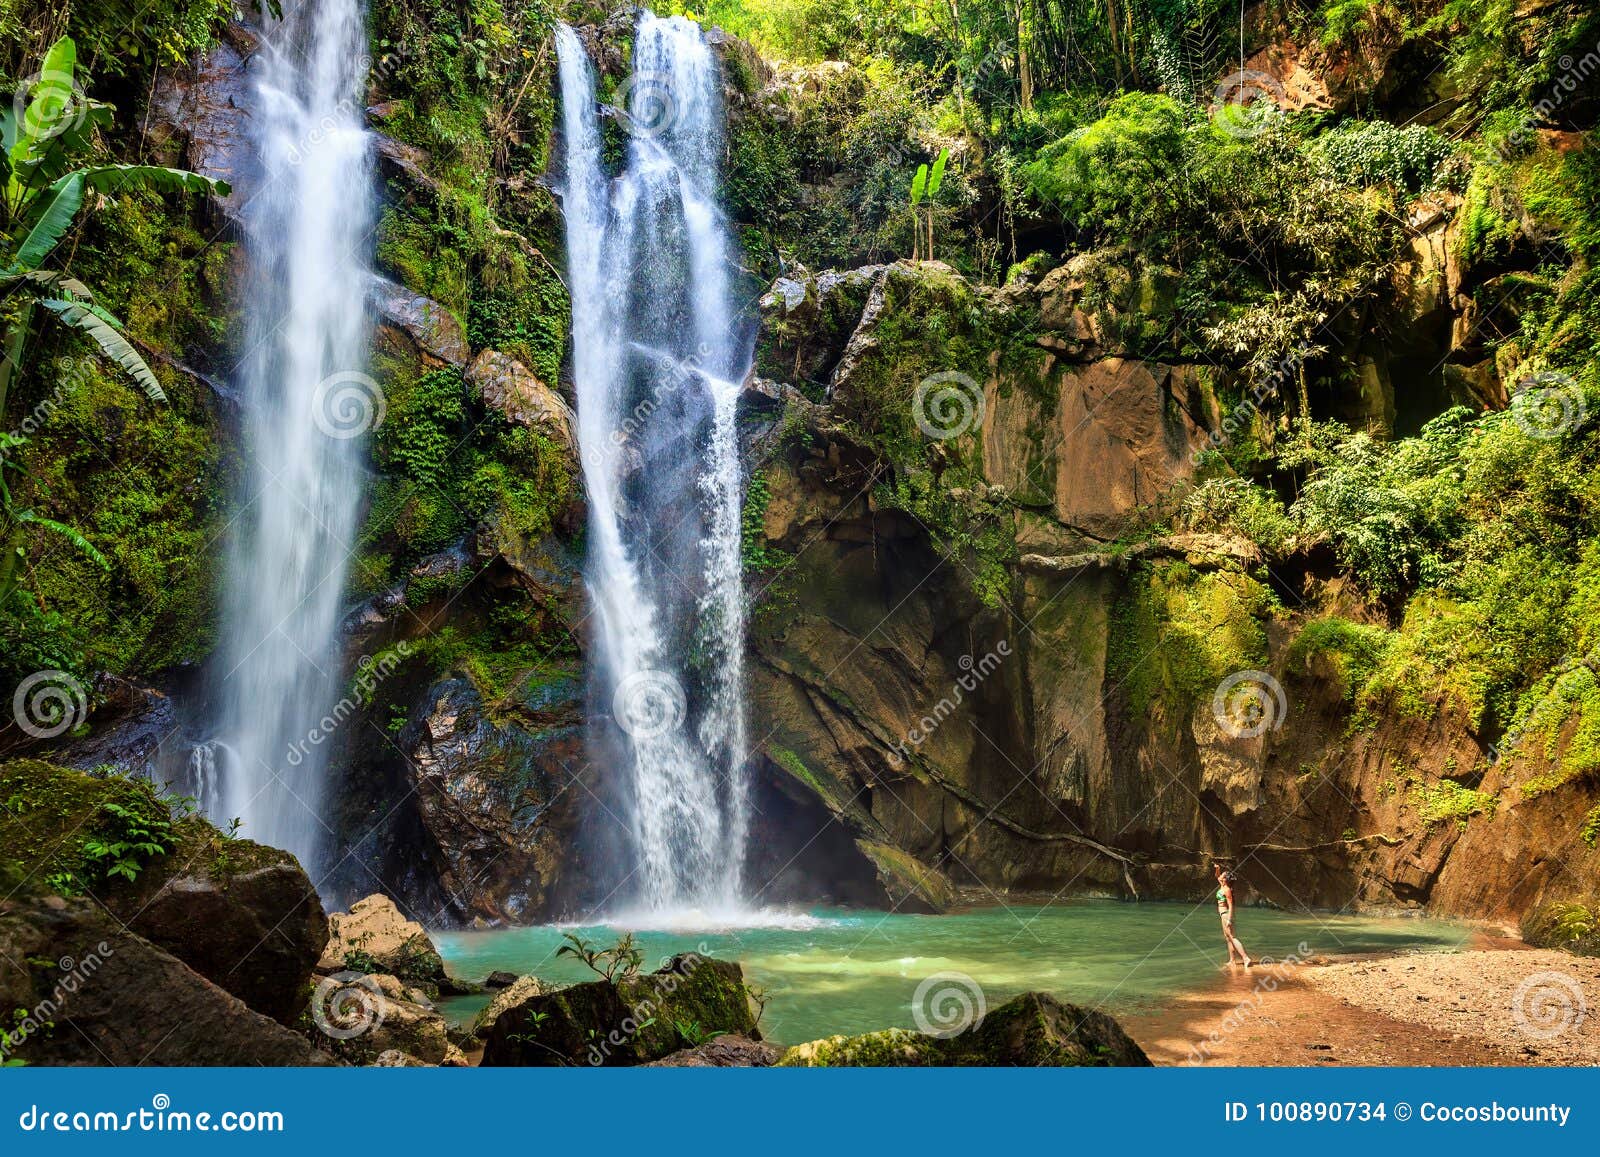 Waterfall Hidden in the Tropical Jungle Stock Photo - Image of background,  enjoy: 100890734